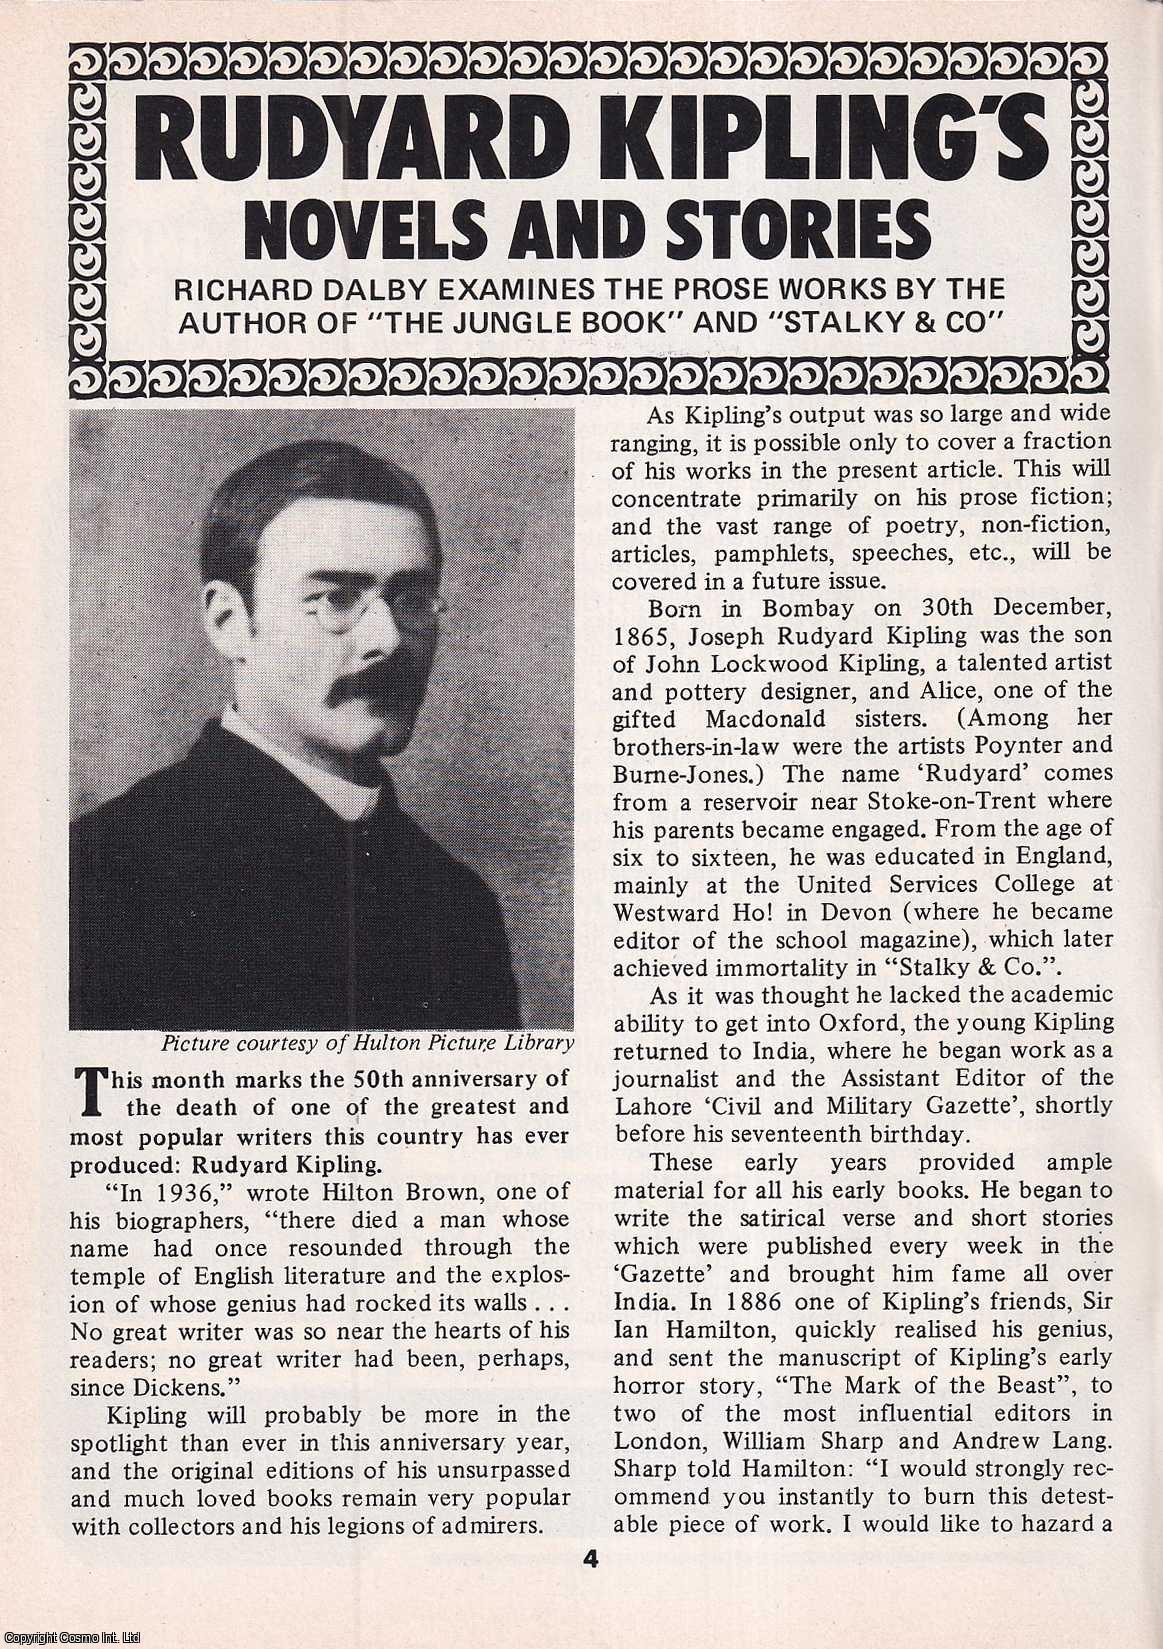 Richard Dalby - Rudyard Kipling's Novels & Stories. This is an original article separated from an issue of The Book & Magazine Collector publication.